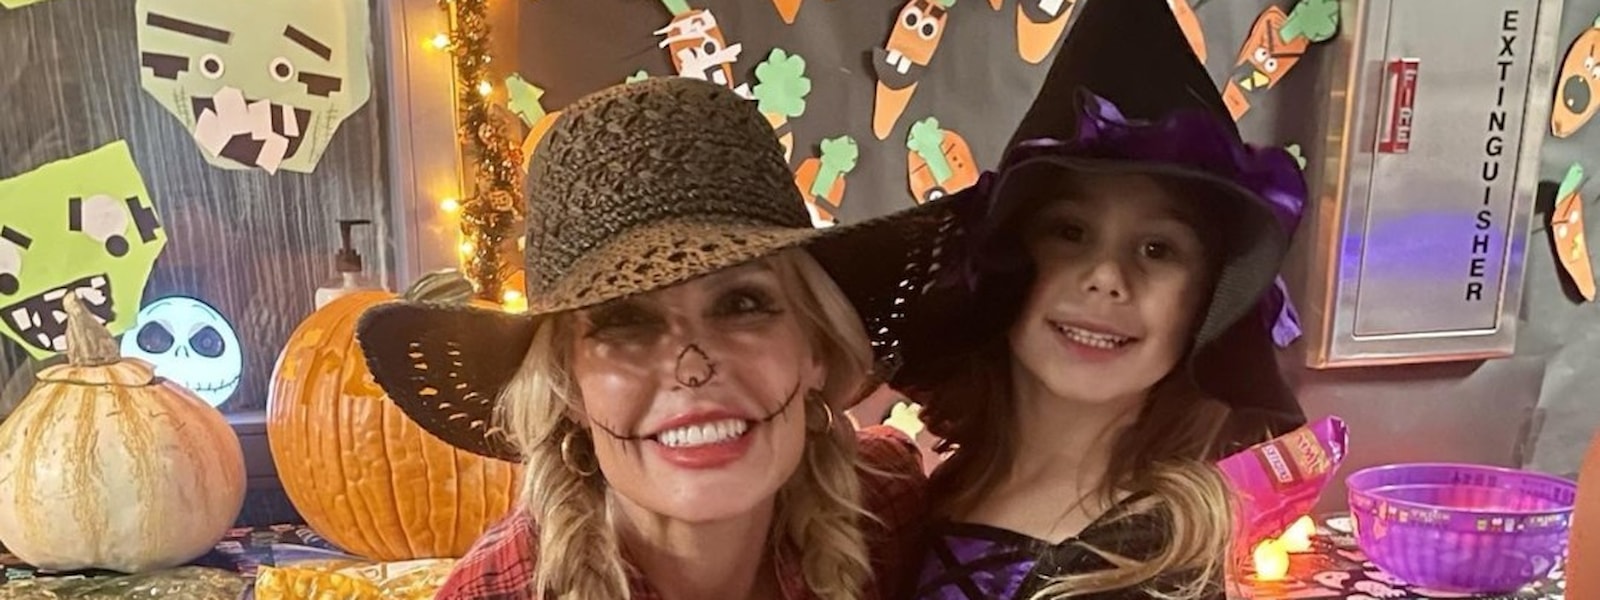 Parent and daughter in Halloween costumes